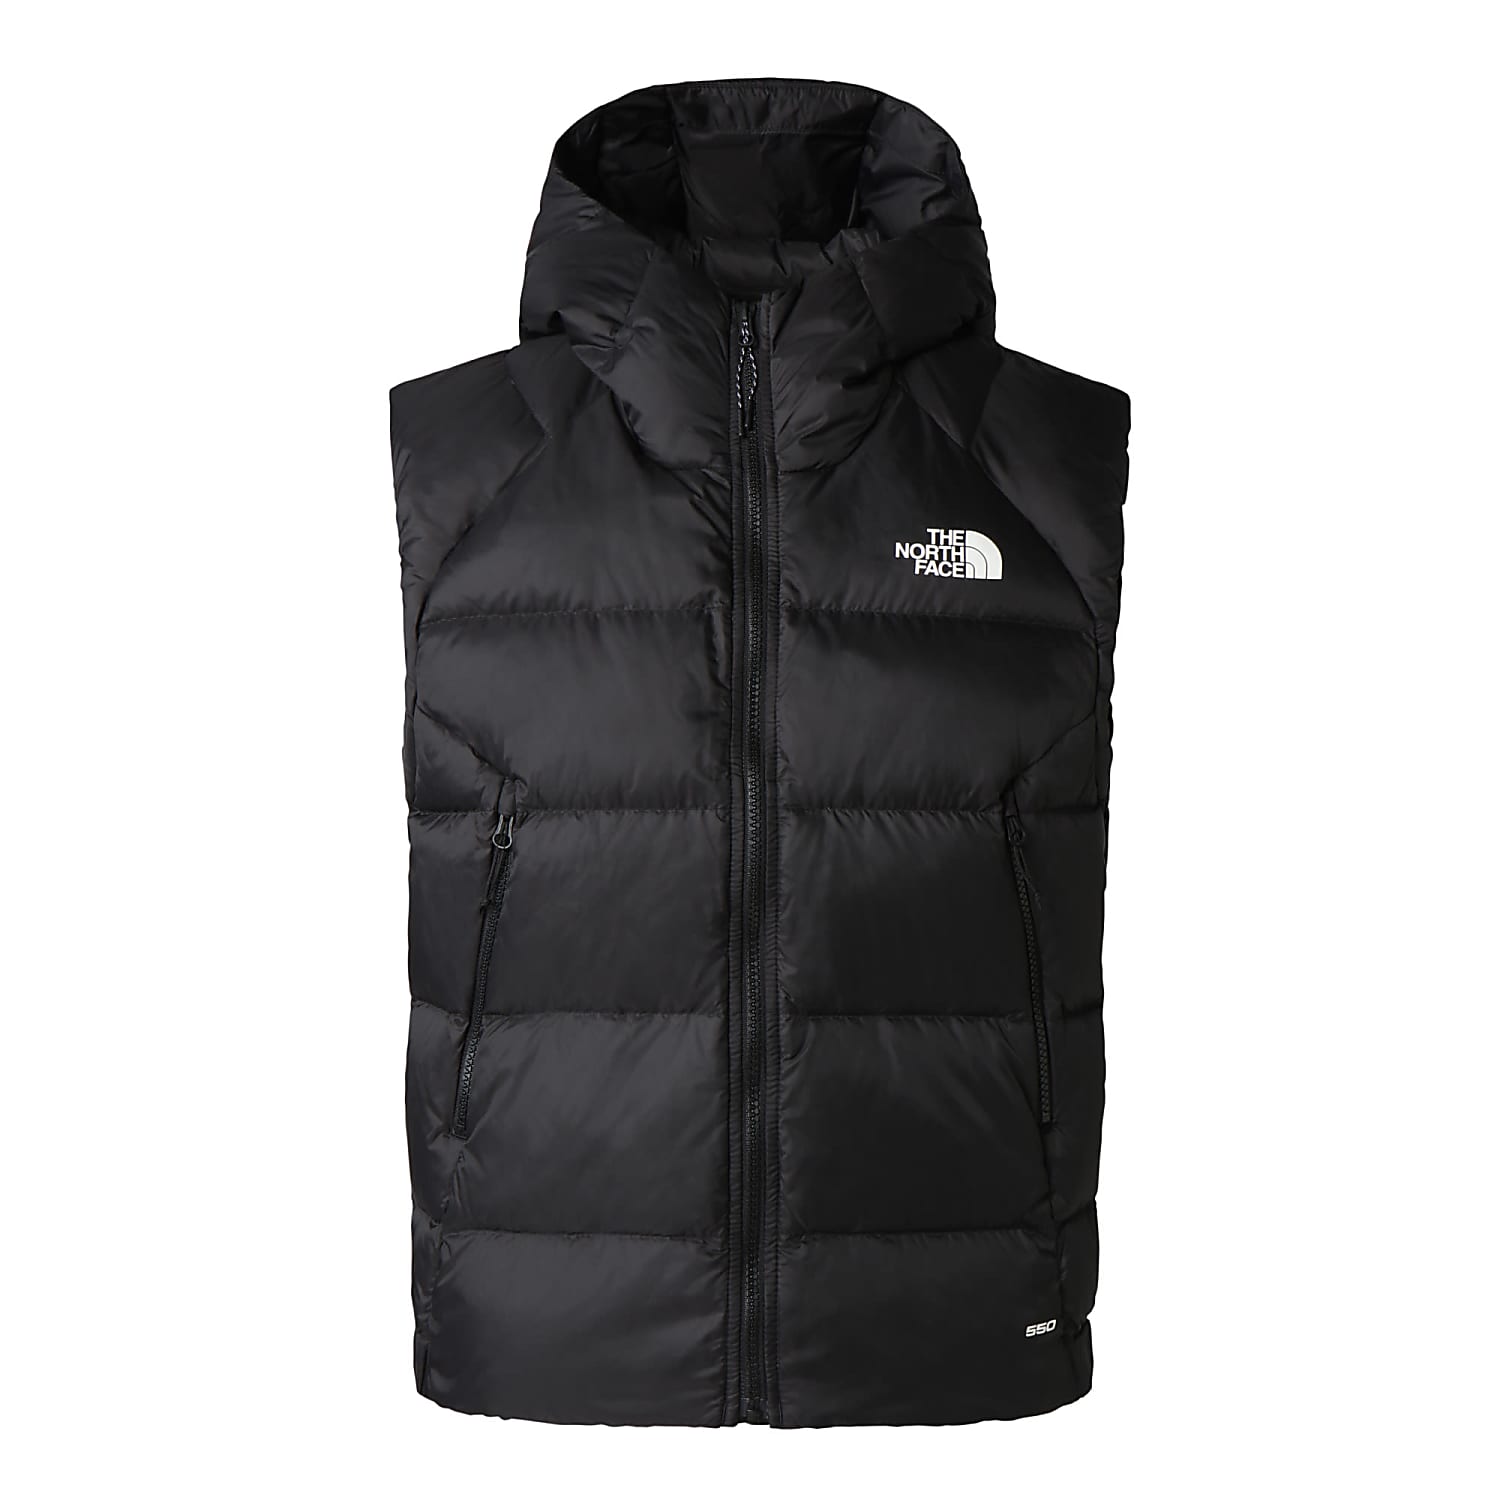 The North Face and Fast cheap HYALITE shipping VEST, W - TNF Black